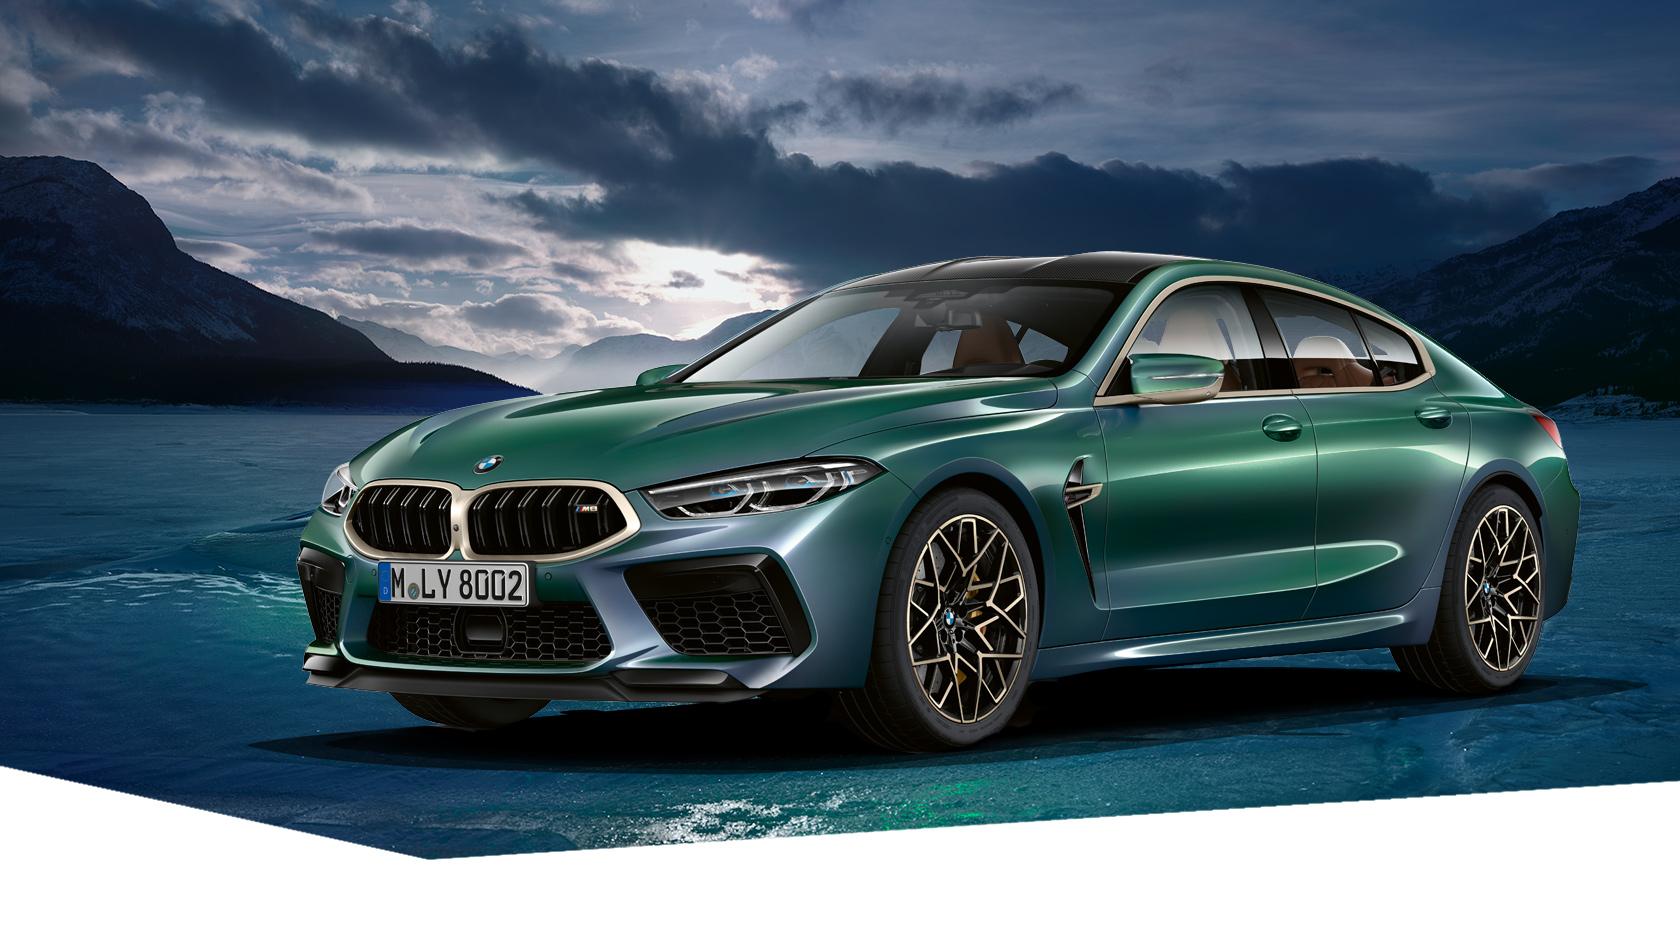 The BMW M8 Gran Coupé First Edition